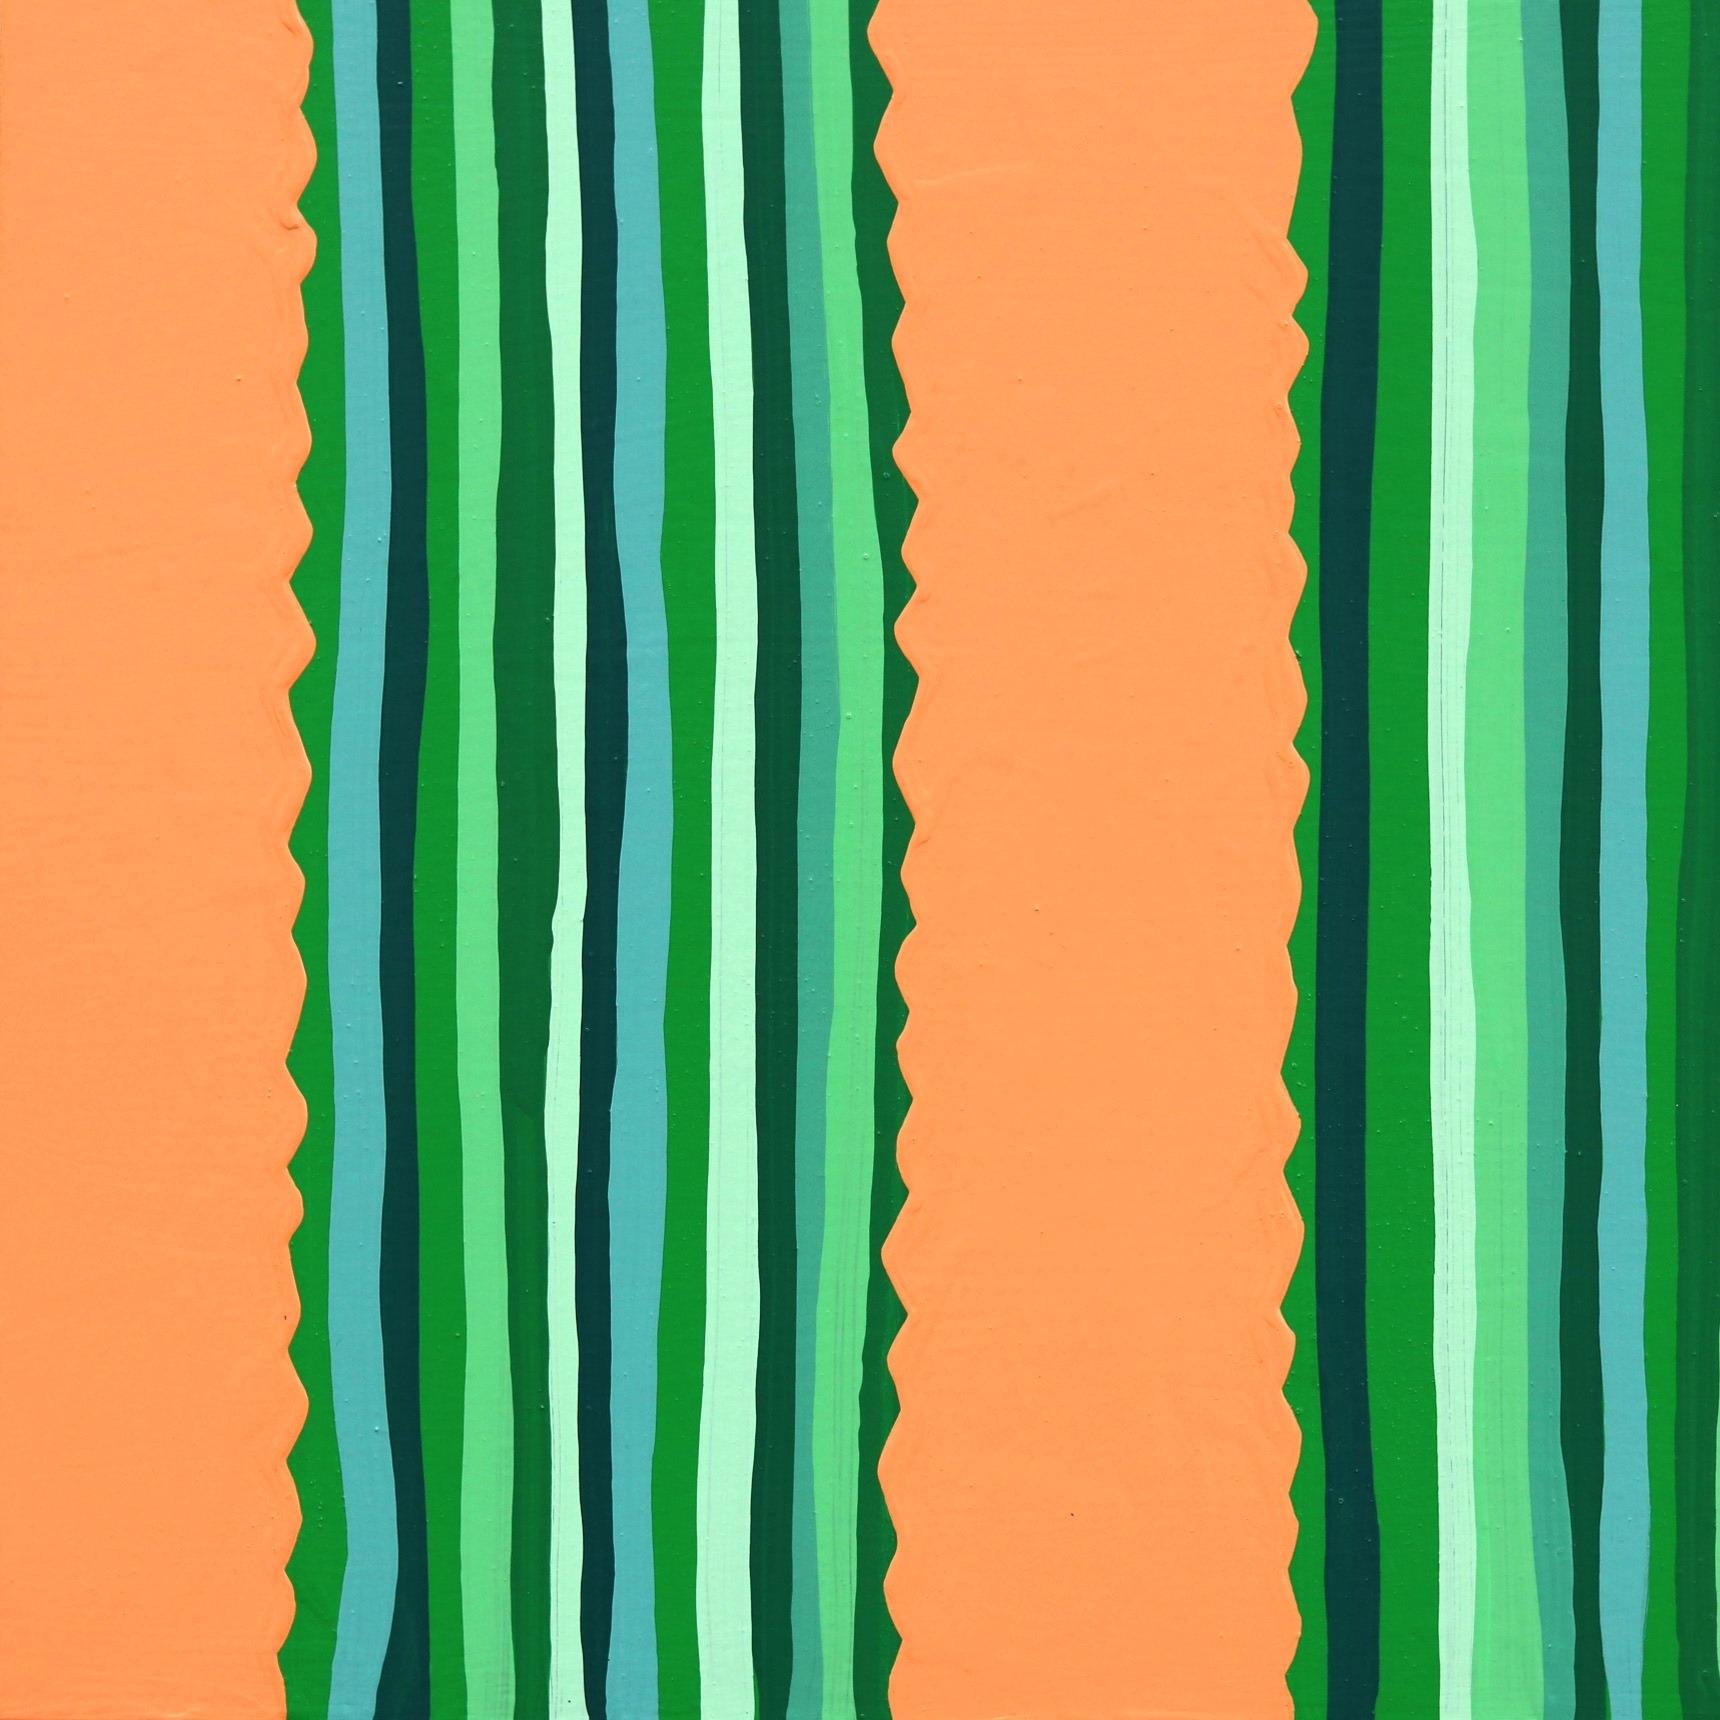 Will Beger and his contemporary-minimalist paintings, take on an entirely unique approach to southwest art. Influenced by his youth and inspired by nature, he effortlessly captures a vibrant, bohemian aesthetic that is unapologetically true to his